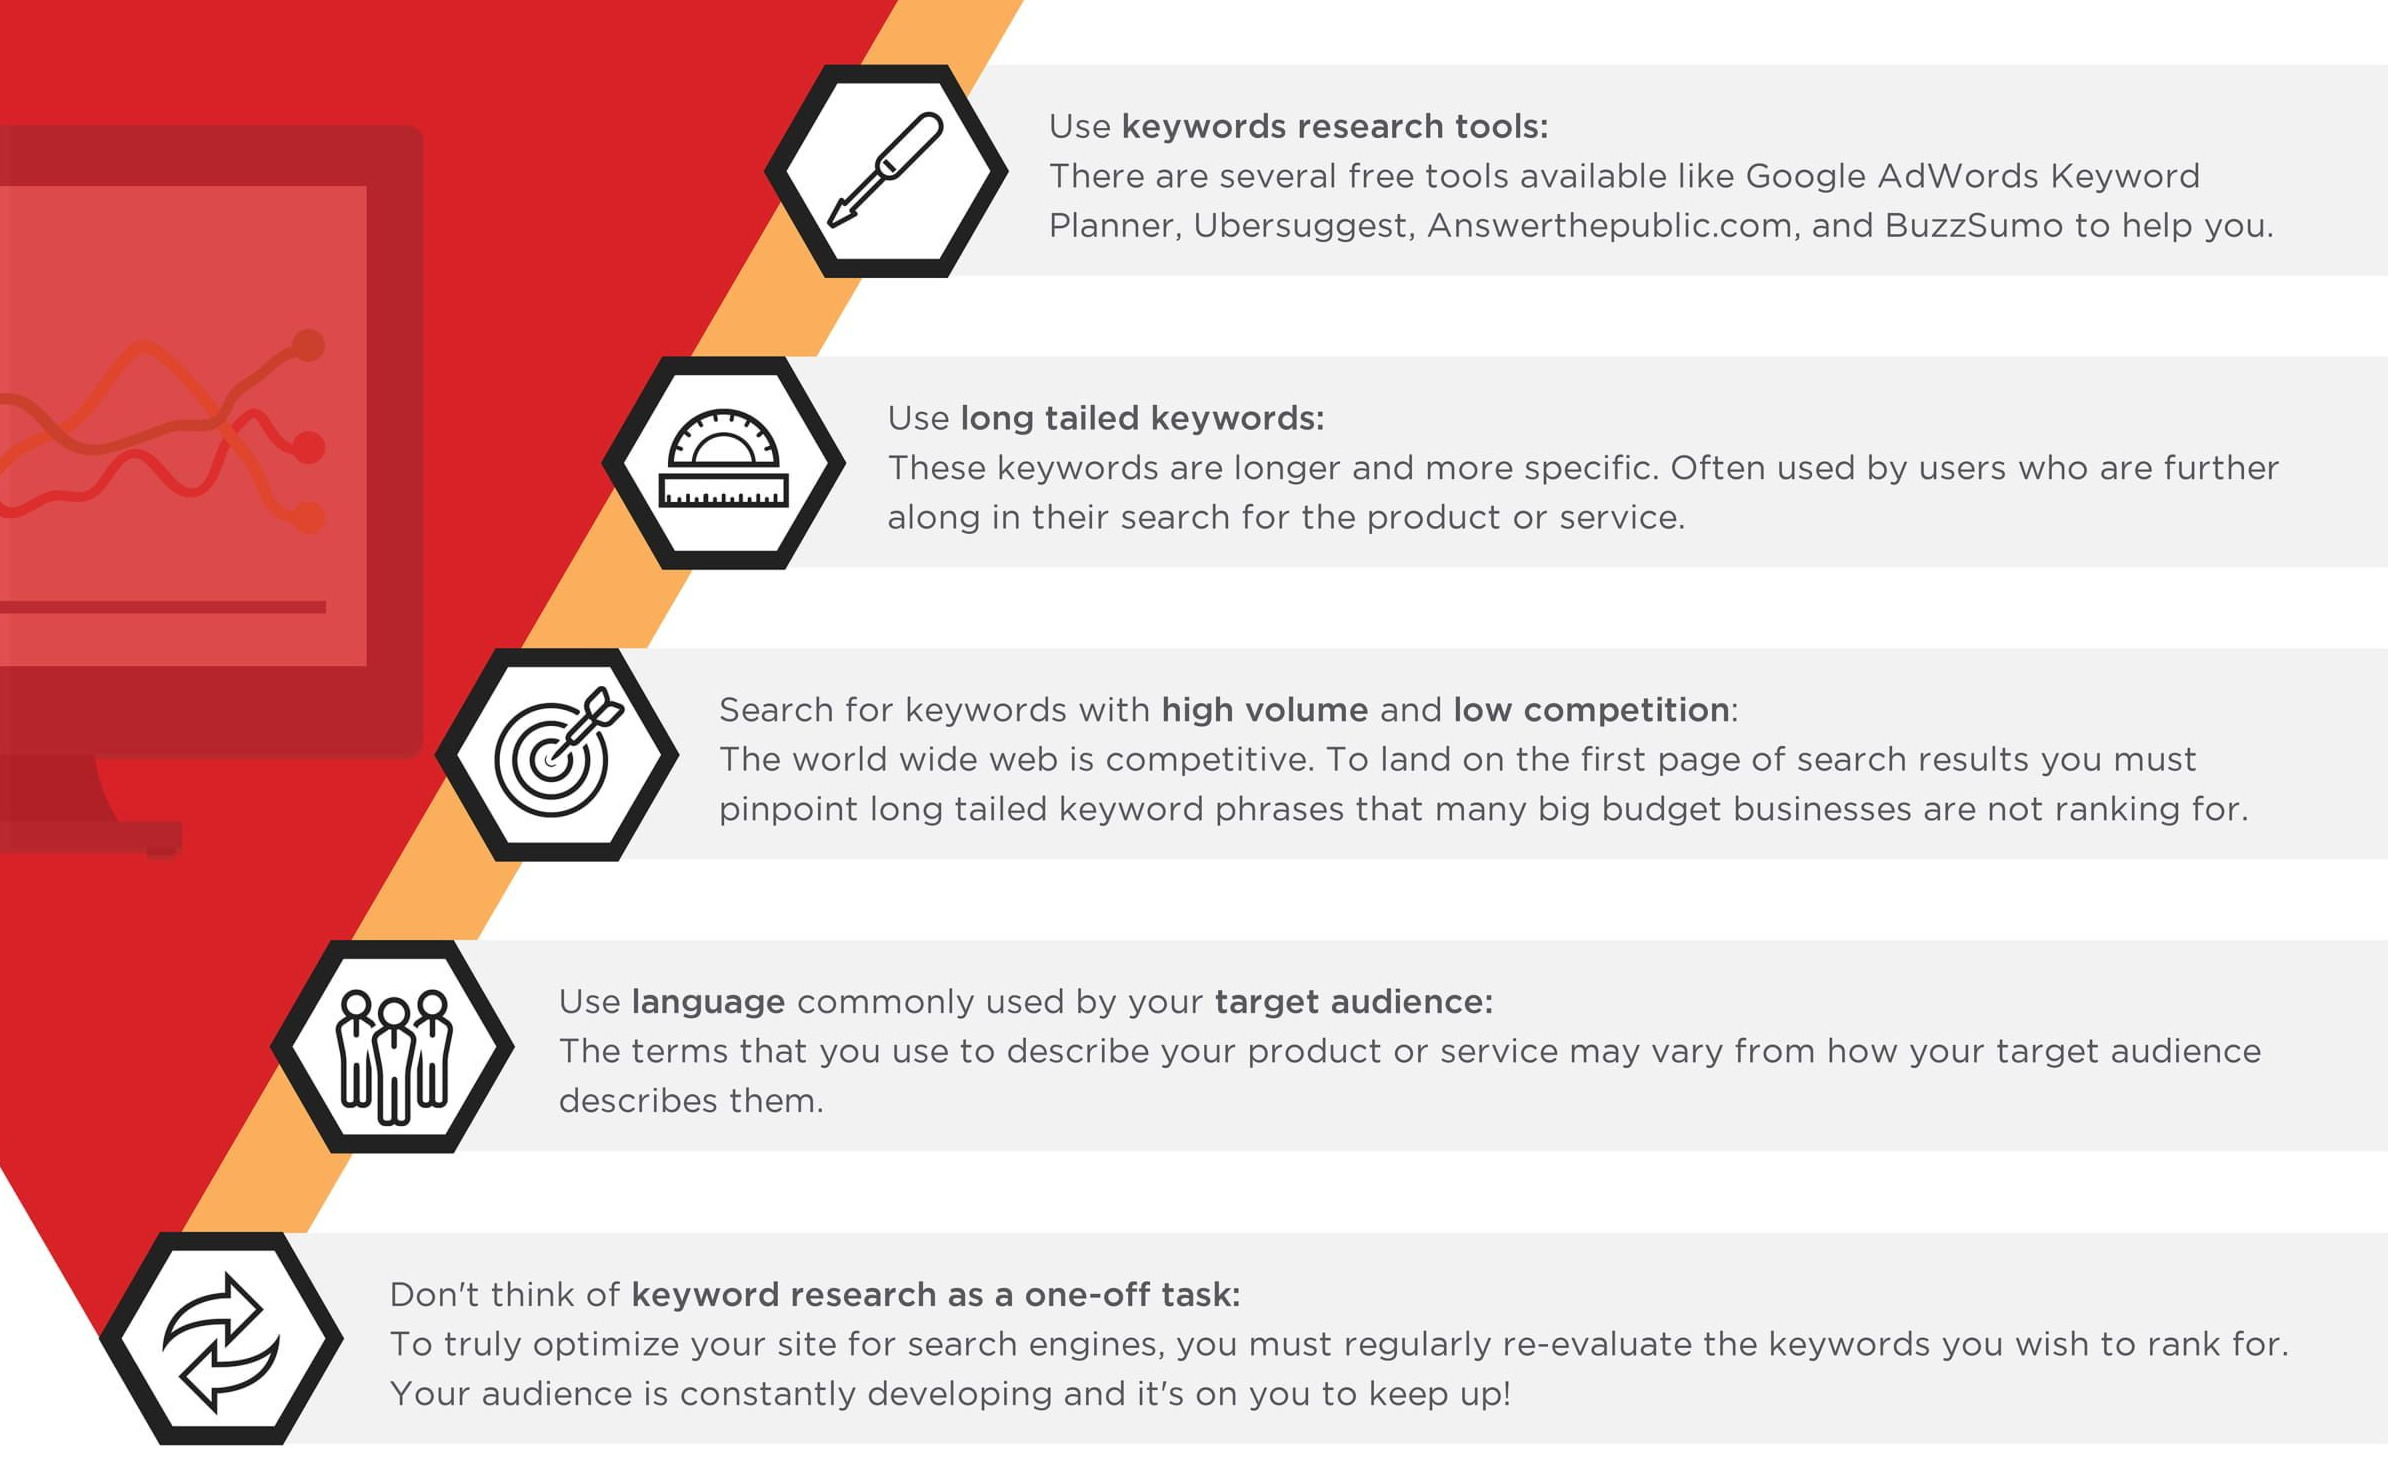 Detailed Keyword Research Based On Target Audience